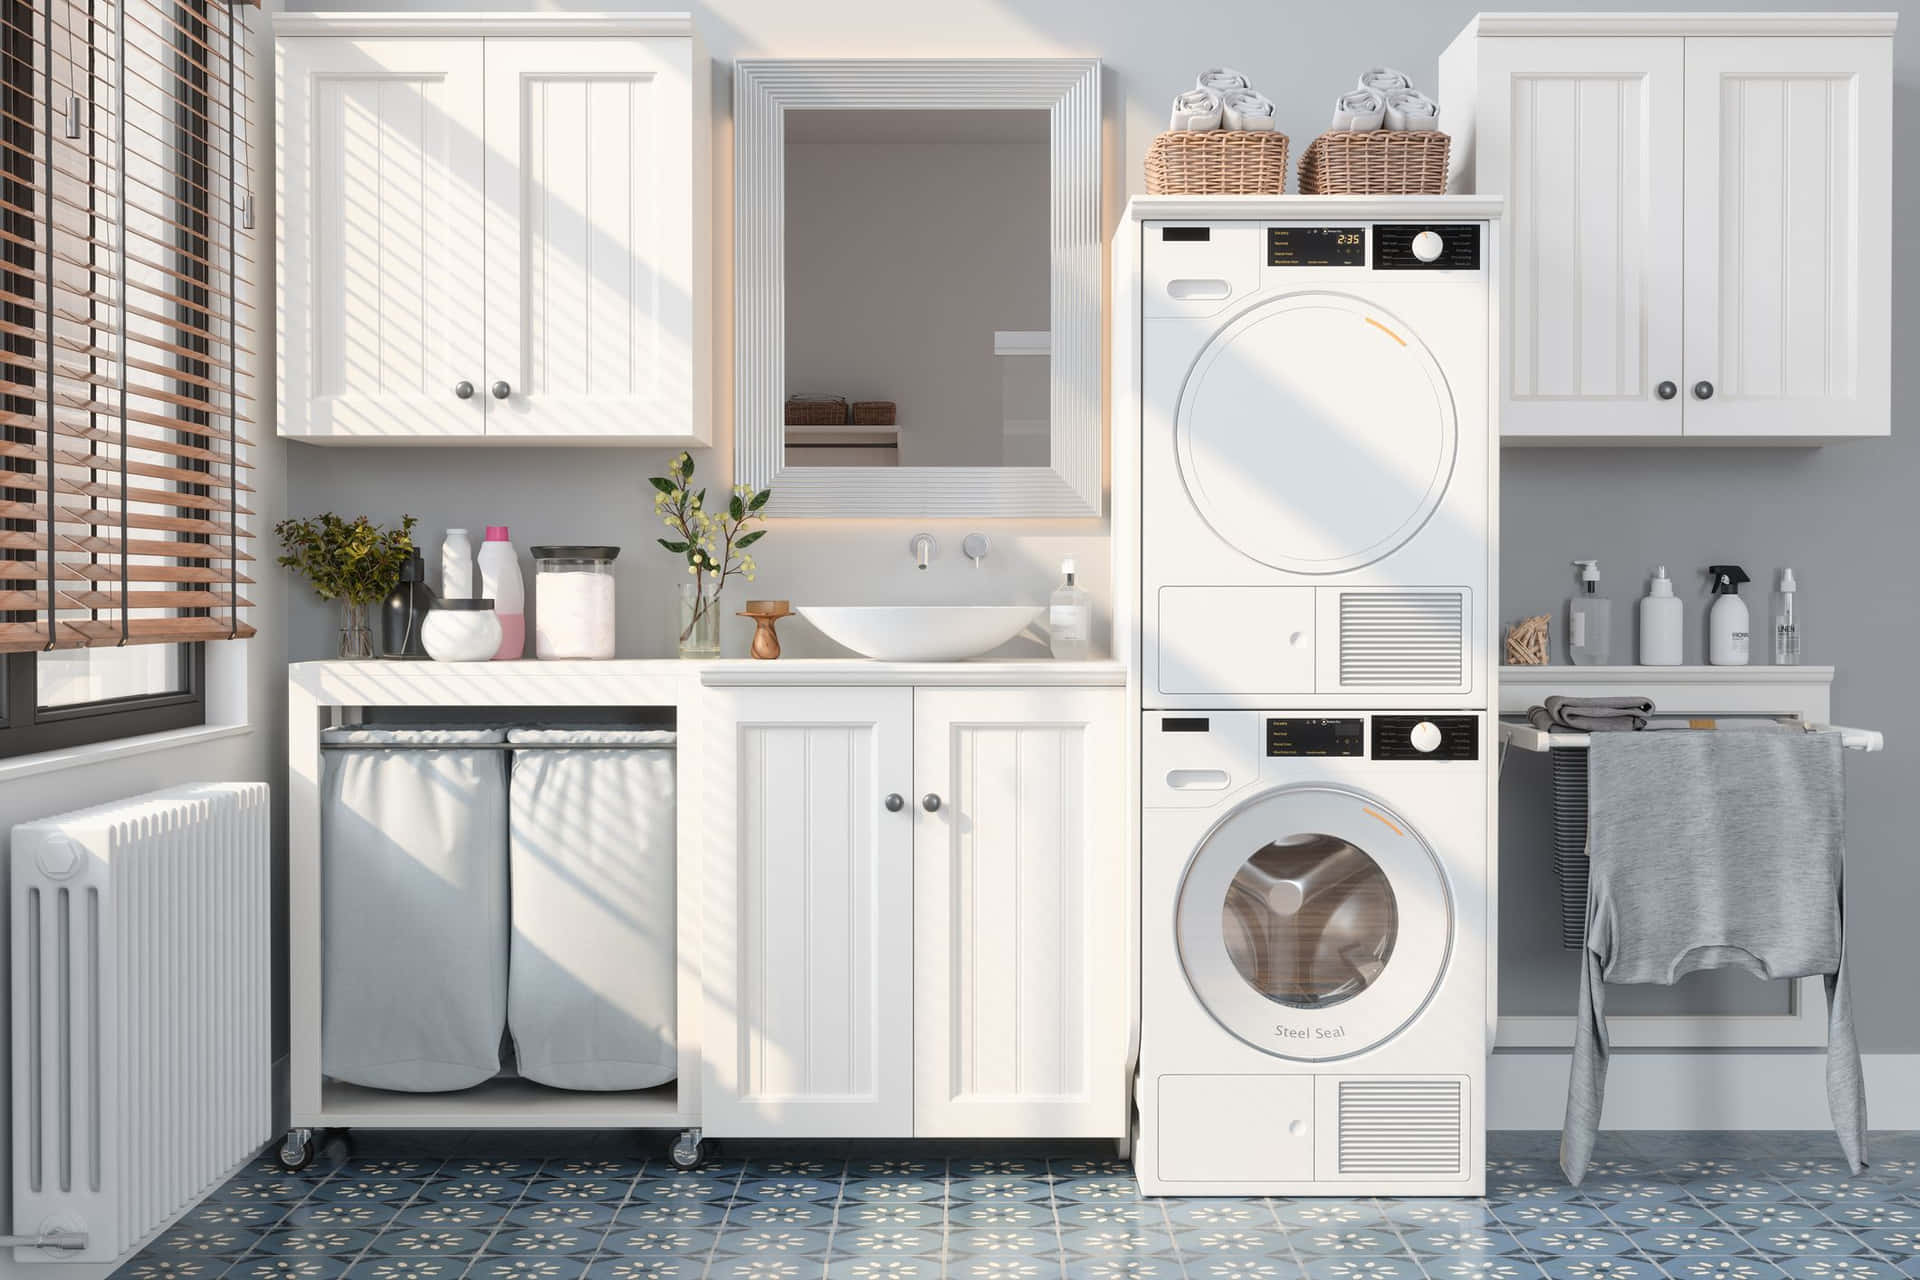 A Laundry Room With A Washing Machine And Sink